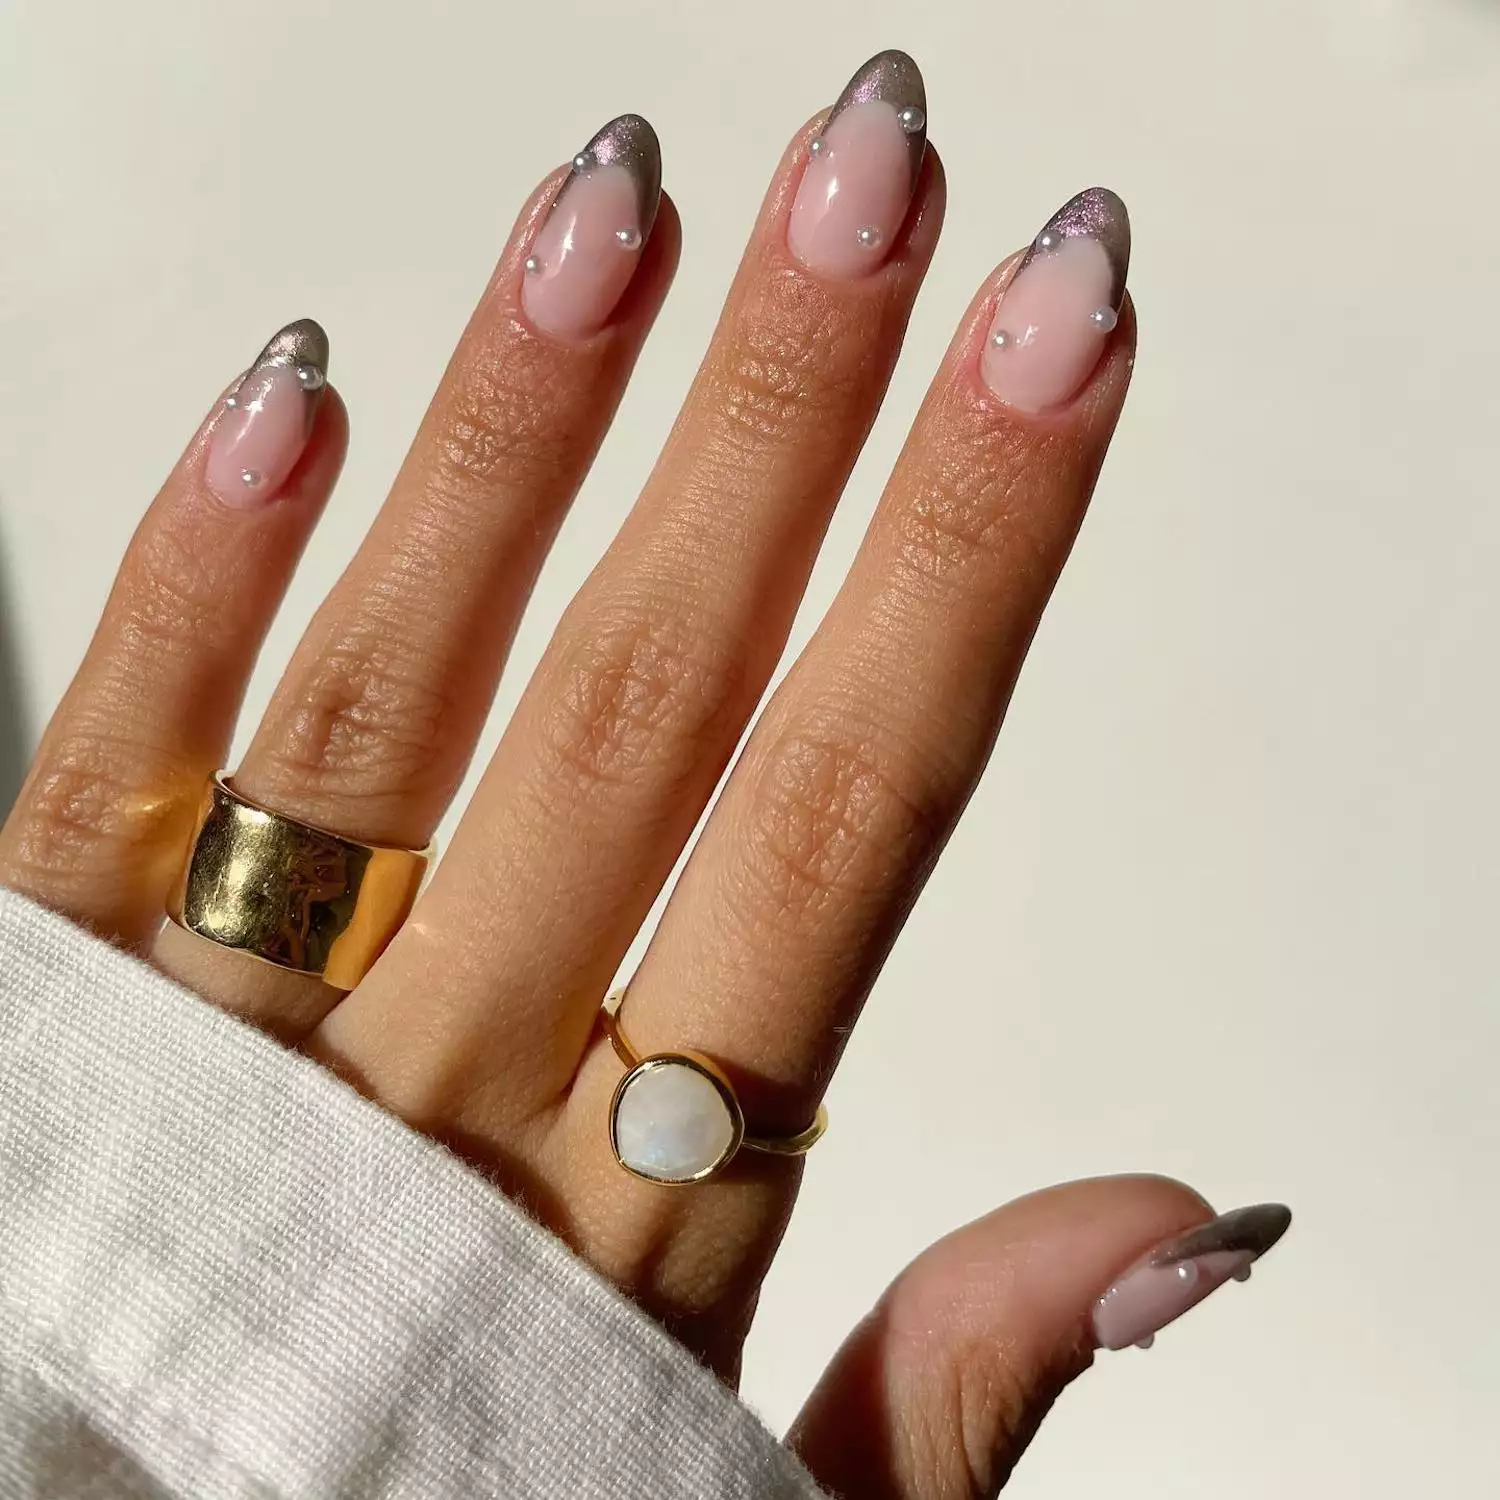 Chrome French manicure with pearl accents